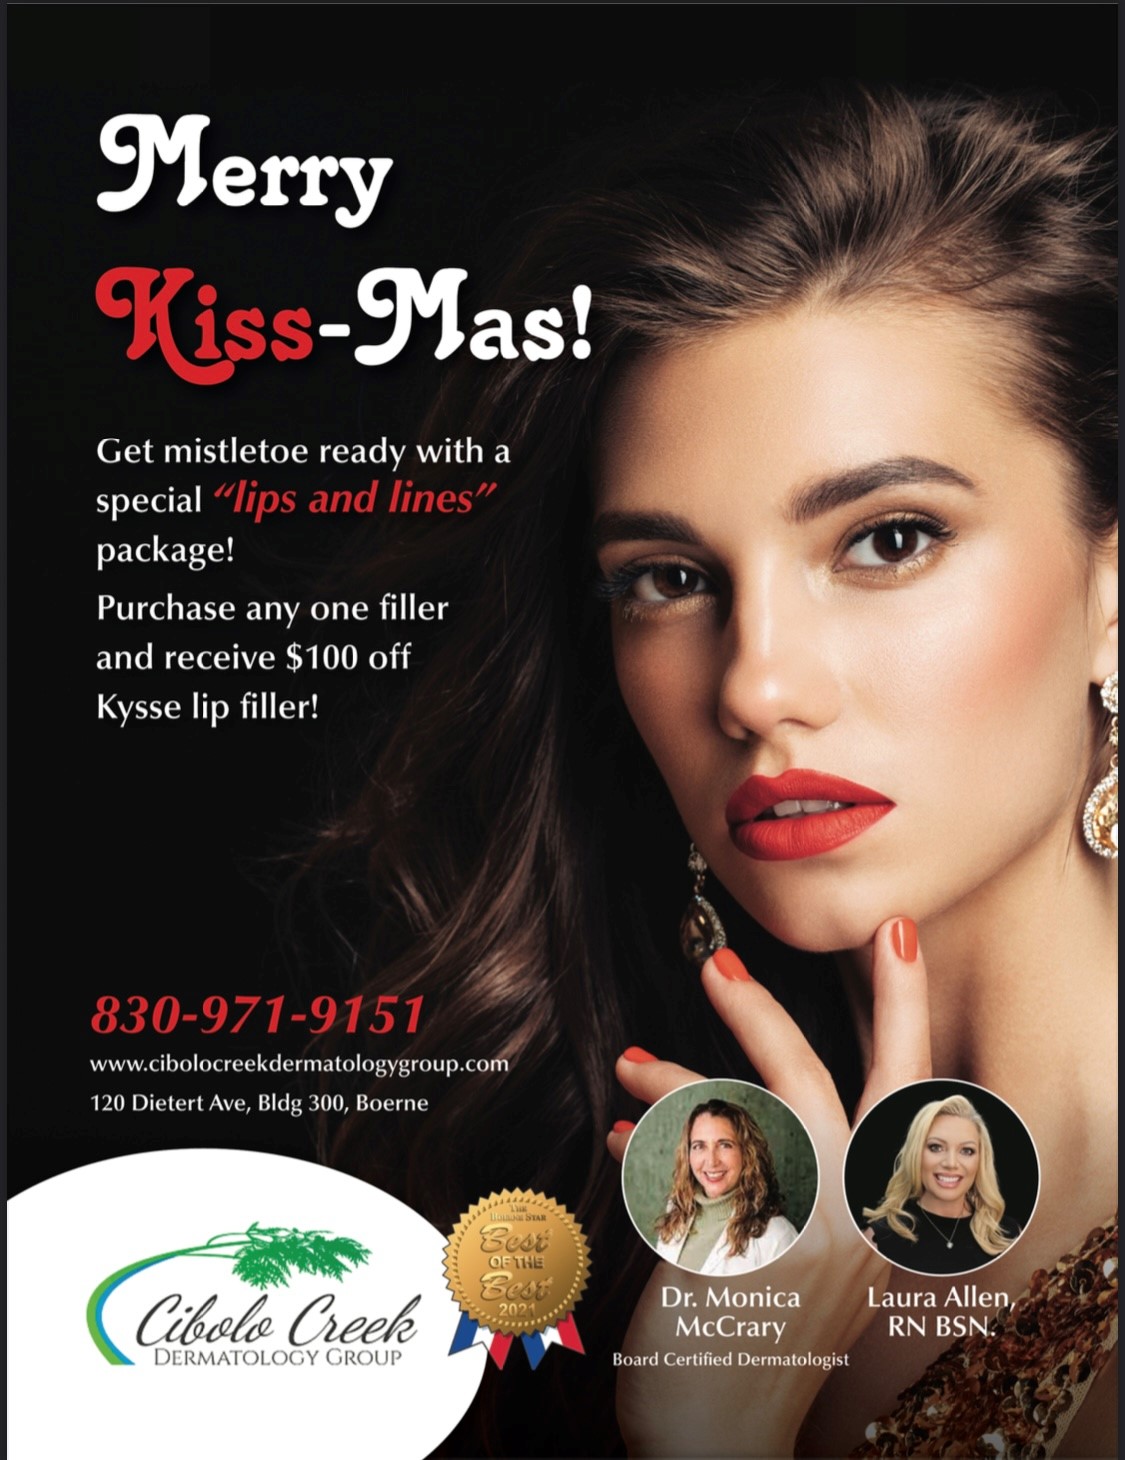 Holiday Specials: Purchase any filler for lips and lines and get $100 Kysse lip filler